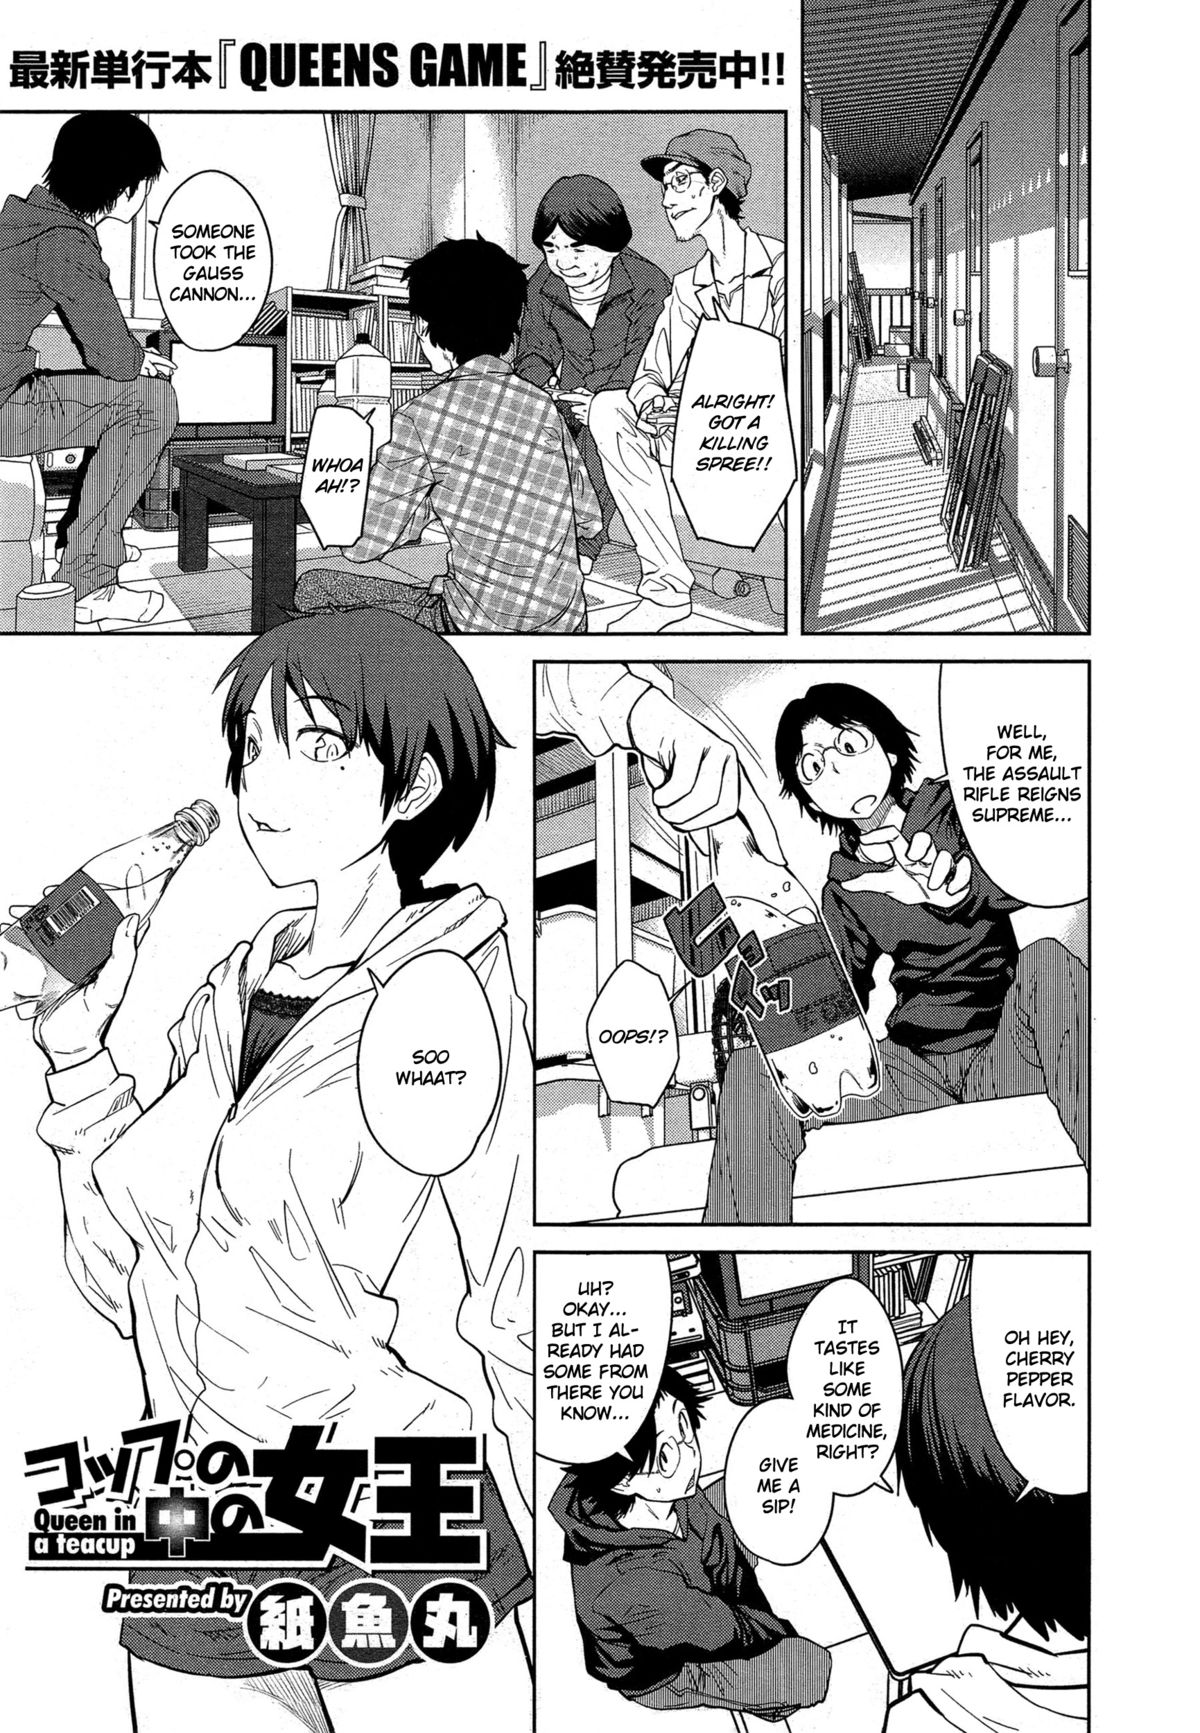 [Shimimaru] Joou Series | Queen Series Ch. 1-3 [English] [Hot Cocoa] page 1 full